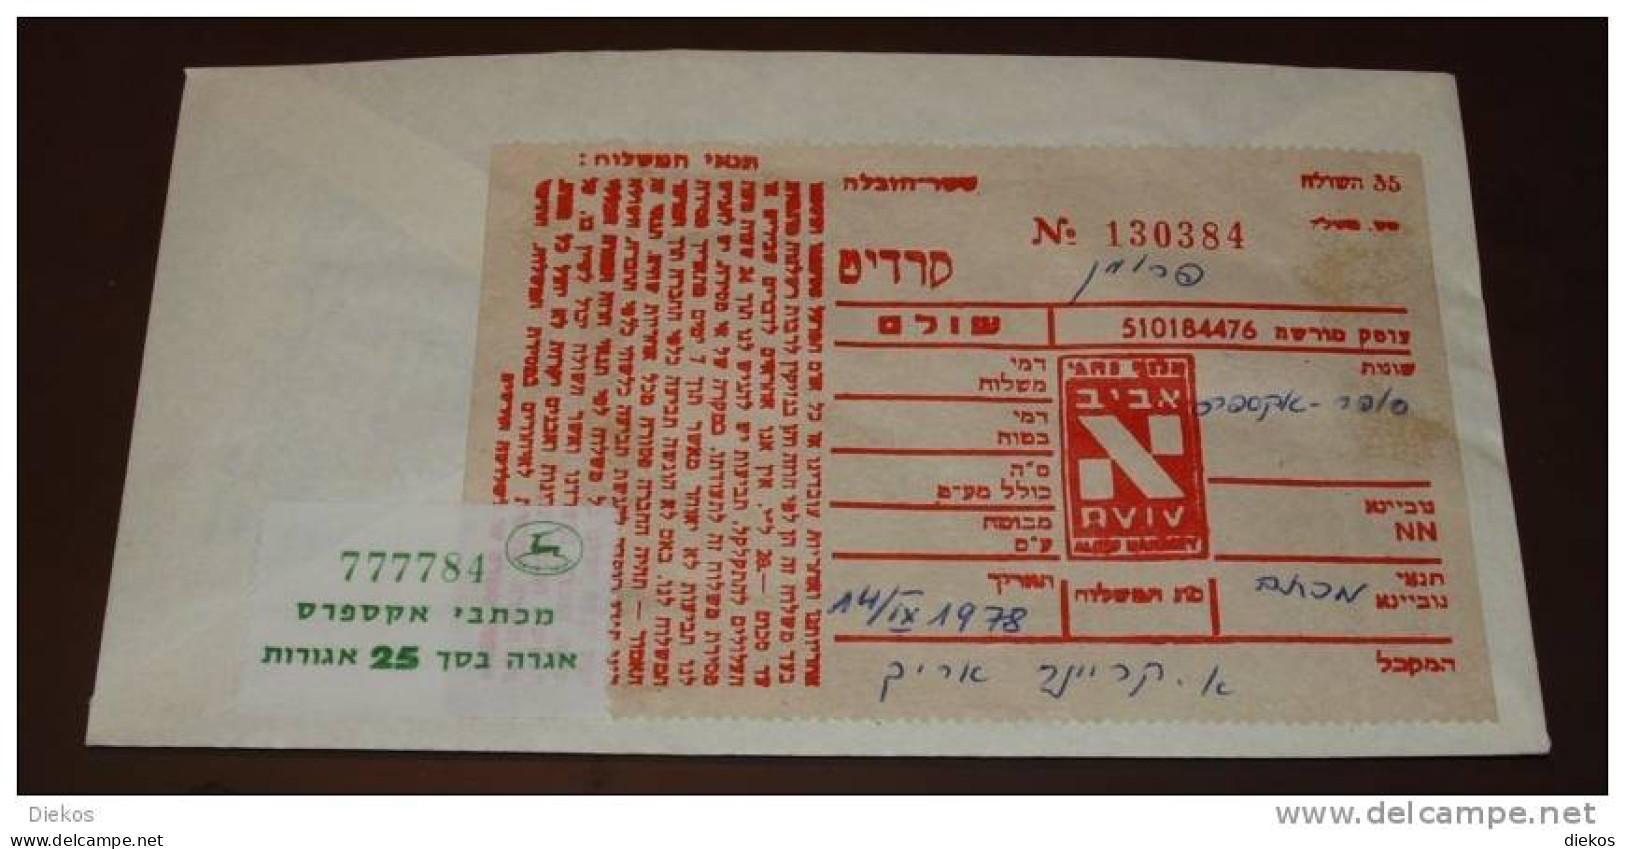 Israel Express Brief Bar Frankatur COVER  1978  #524 - Covers & Documents